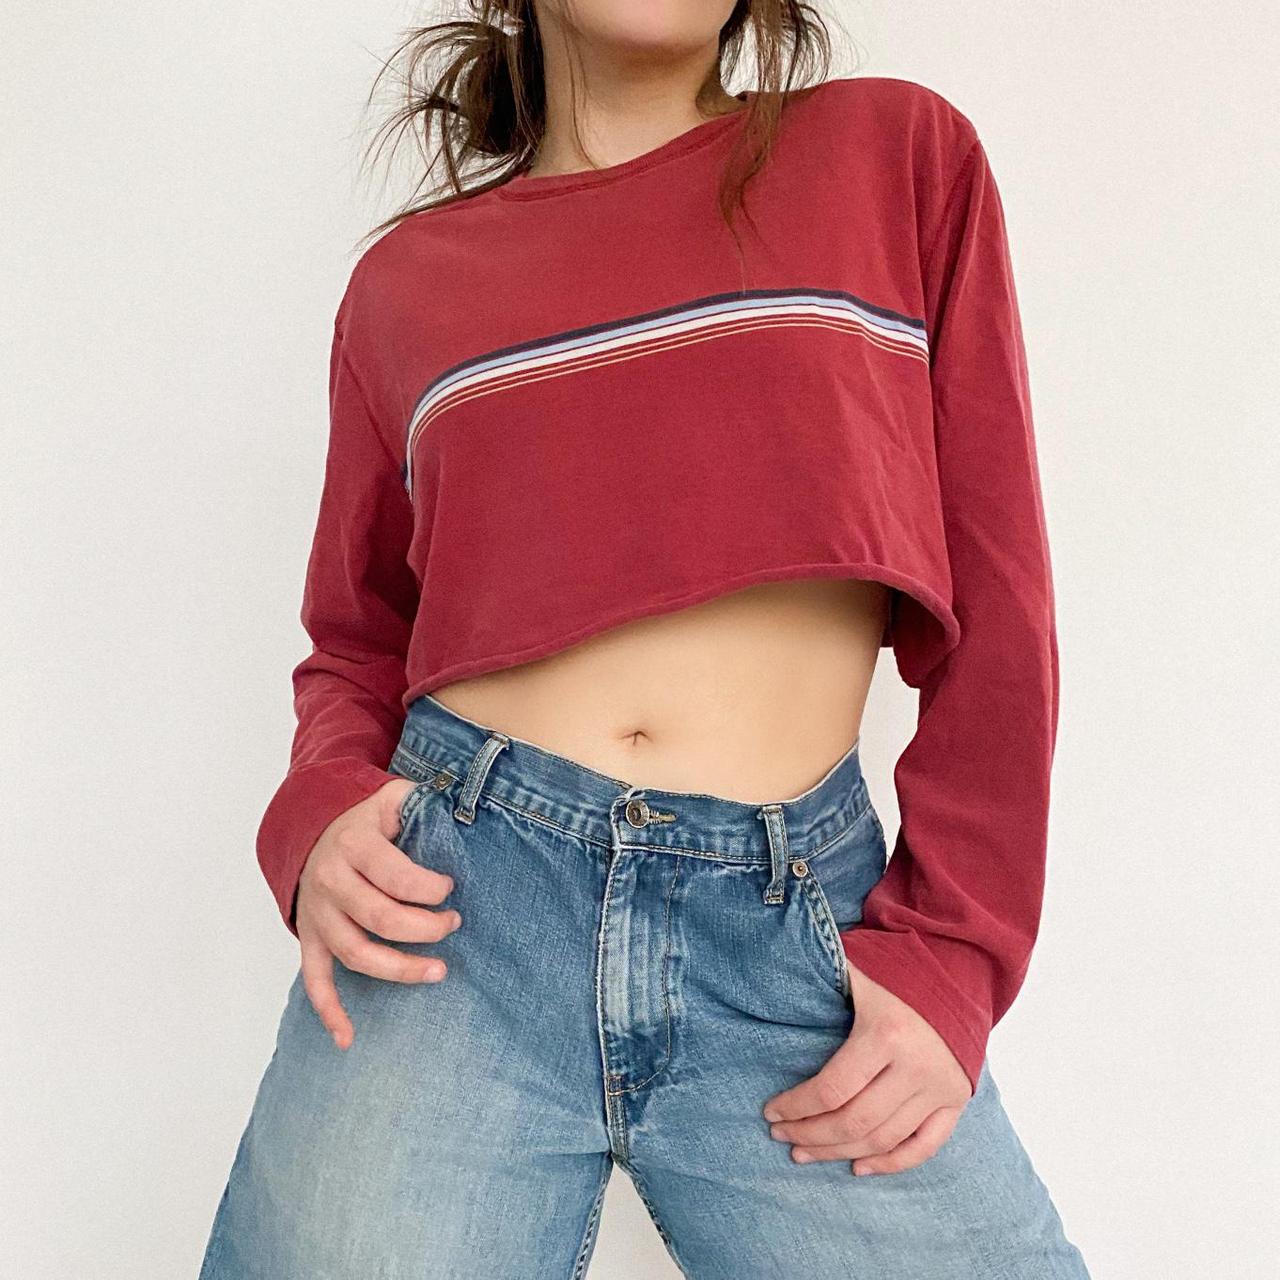 Old Navy Women's Red and Blue Crop-top